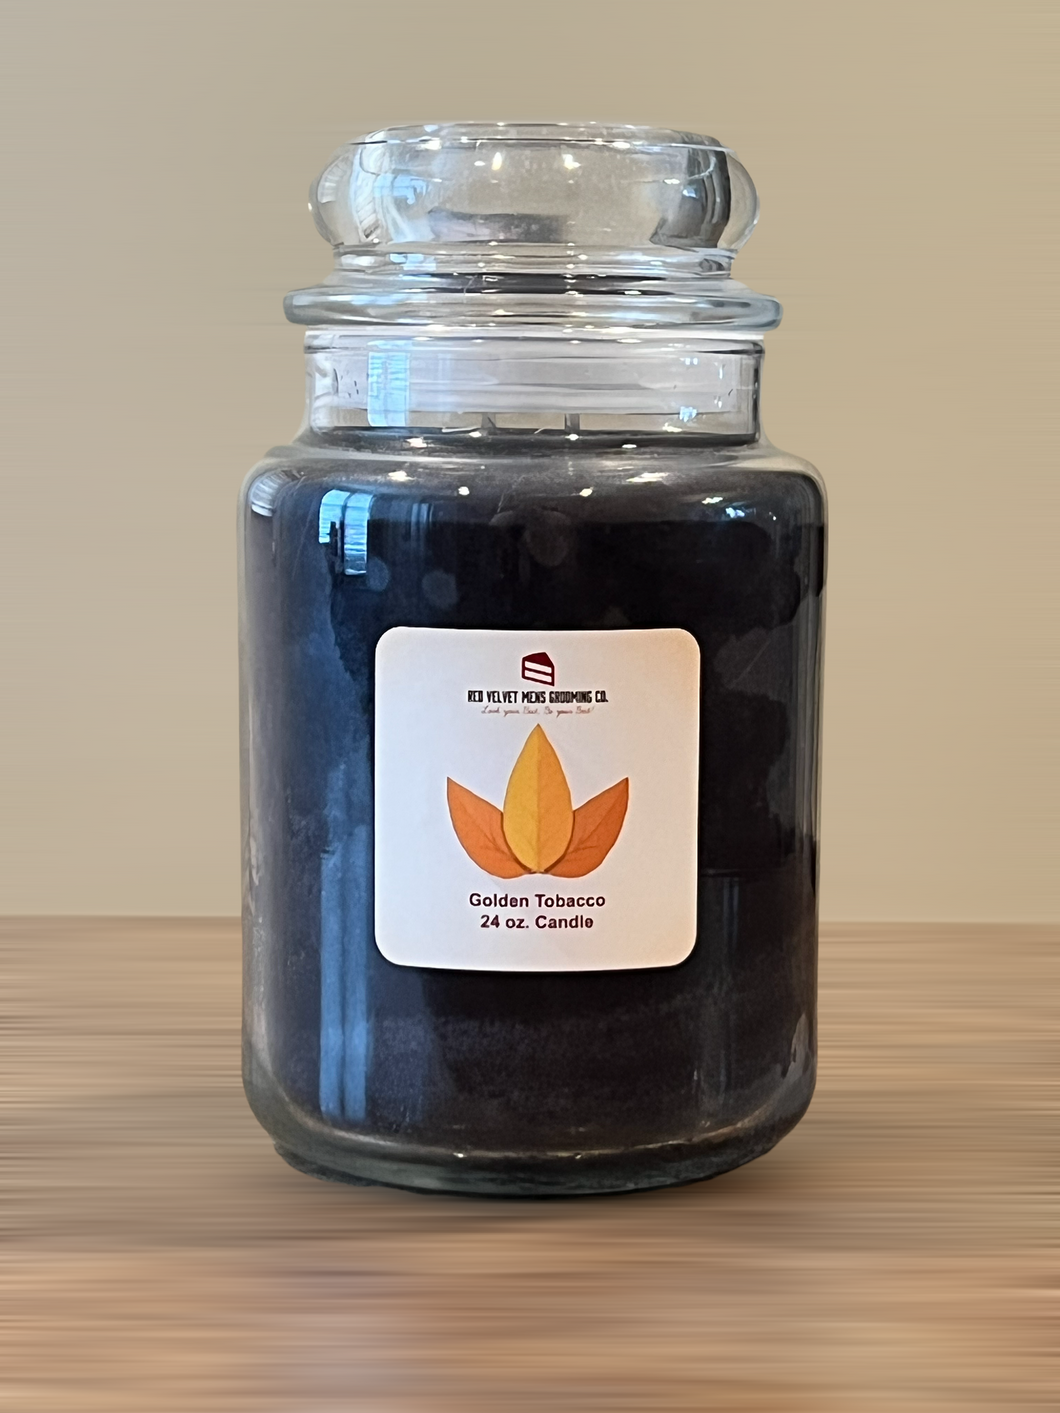 GOLDEN TOBACCO CANDLE - 24oz.